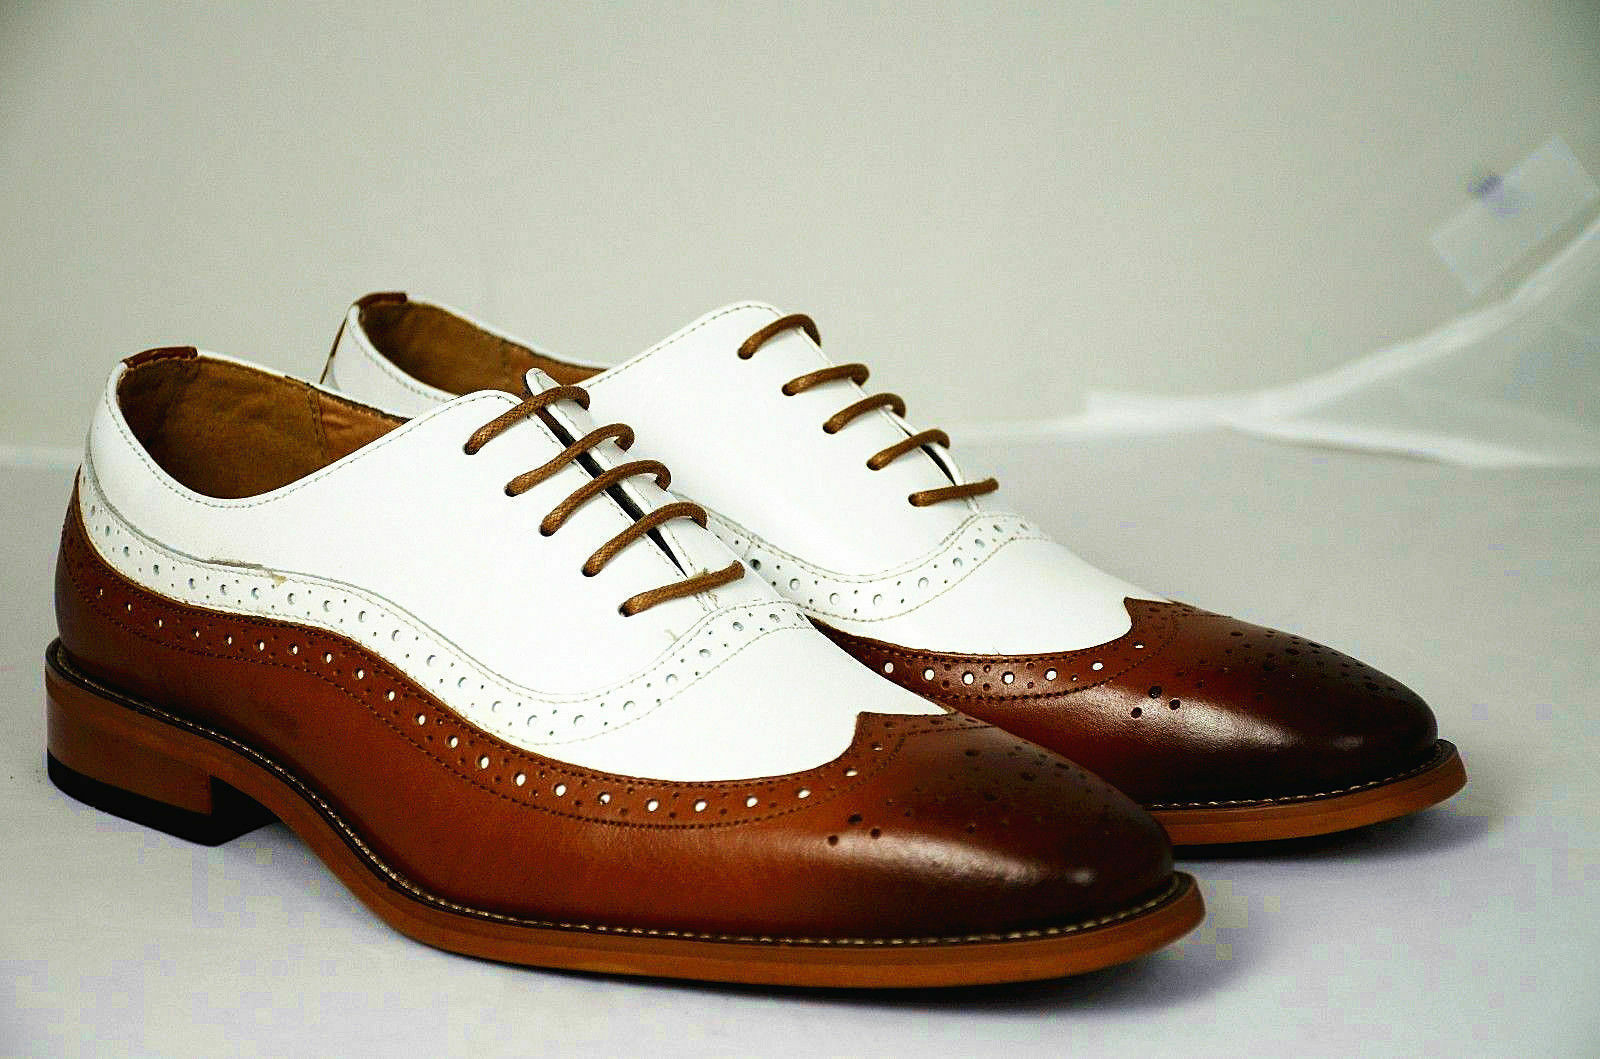 Mens Handmade Shoes Leather Oxford Lace Up Brogue Formal Dress Casual Wear Boots 